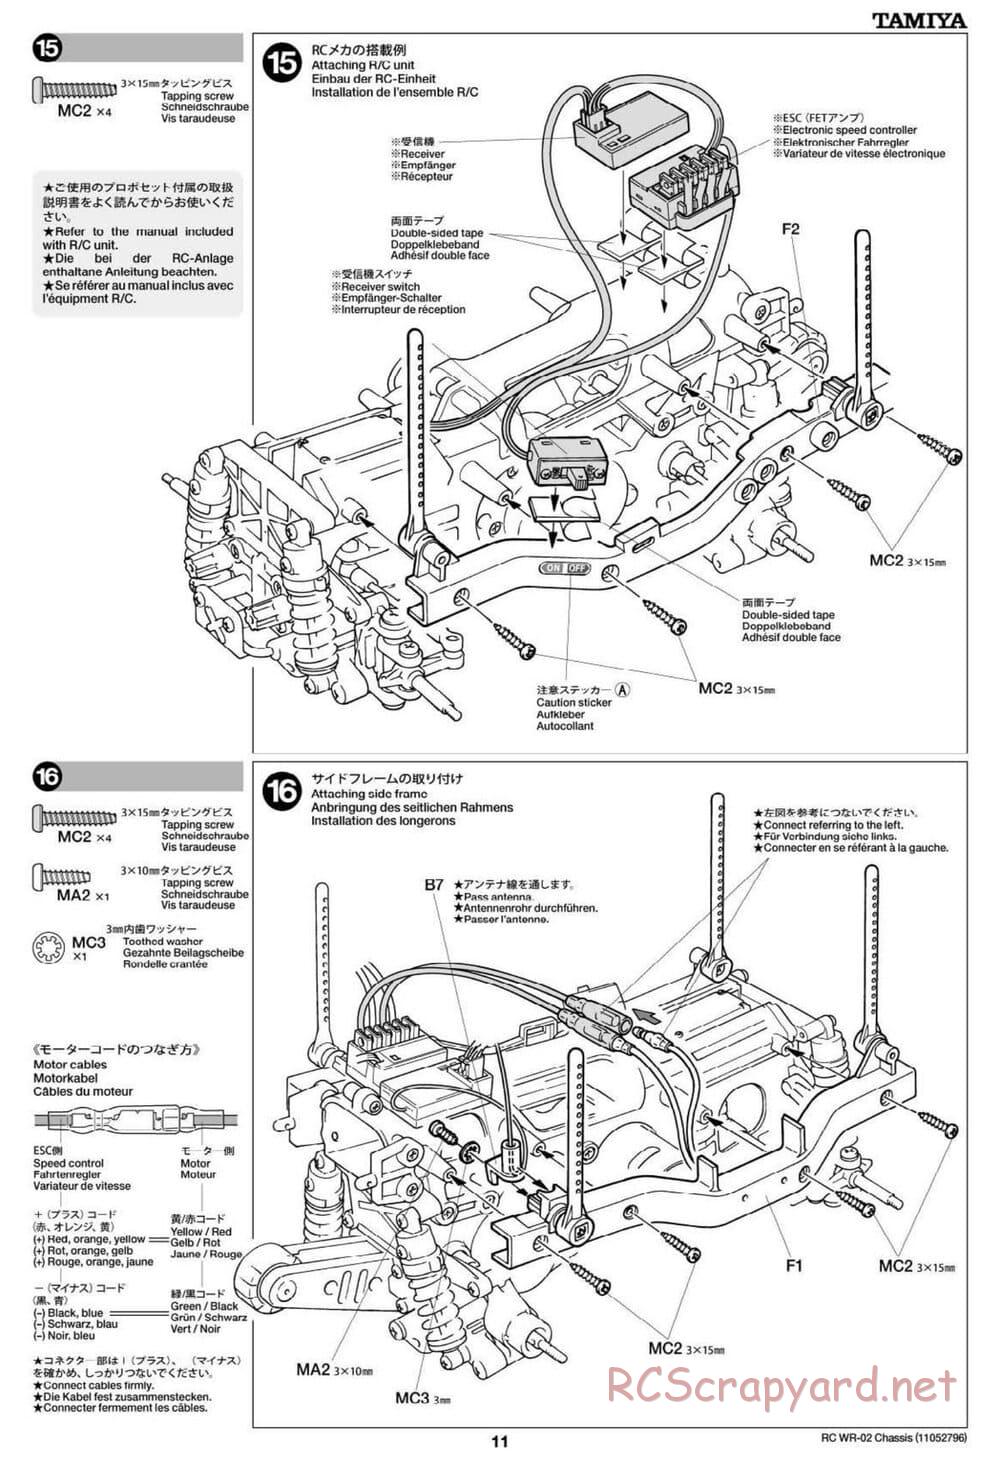 Tamiya - VW Type 2 Wheelie (T1) - WR-02 Chassis - Manual - Page 11